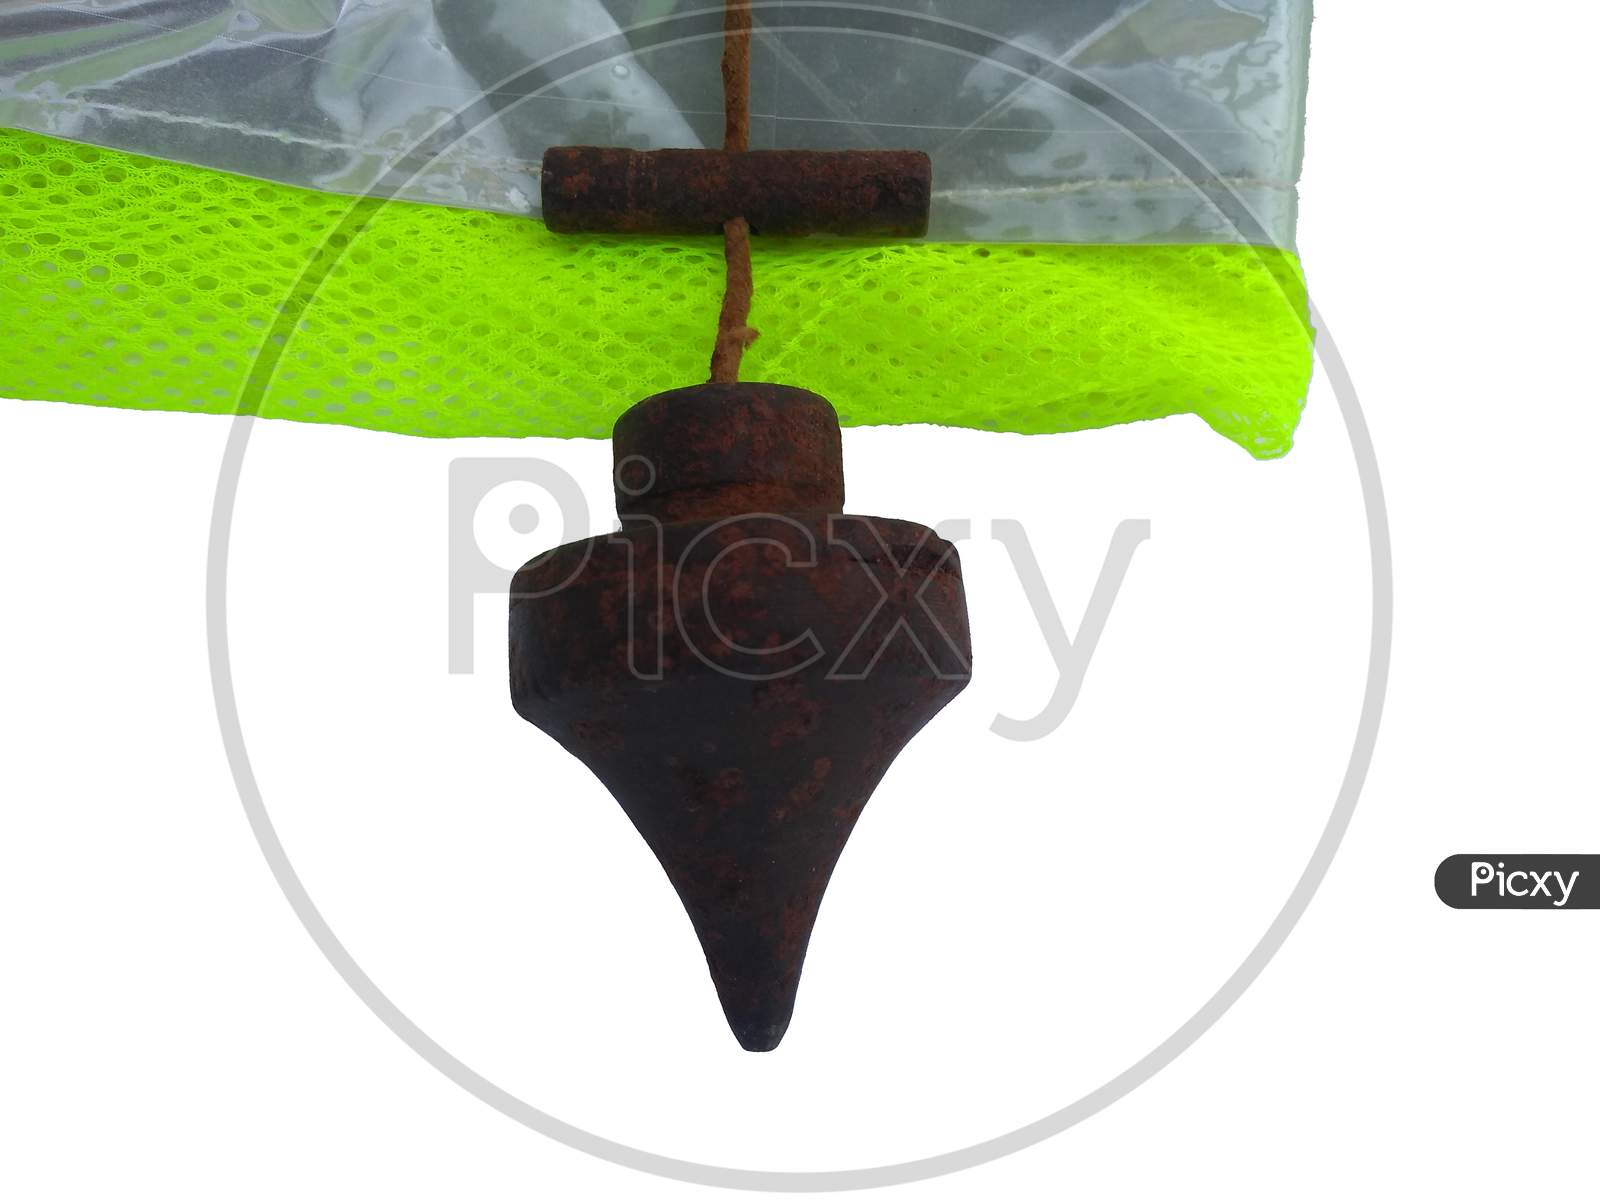 The Constructions Tool Plumb Bob Isolated On White Background With Shiny Jacket.